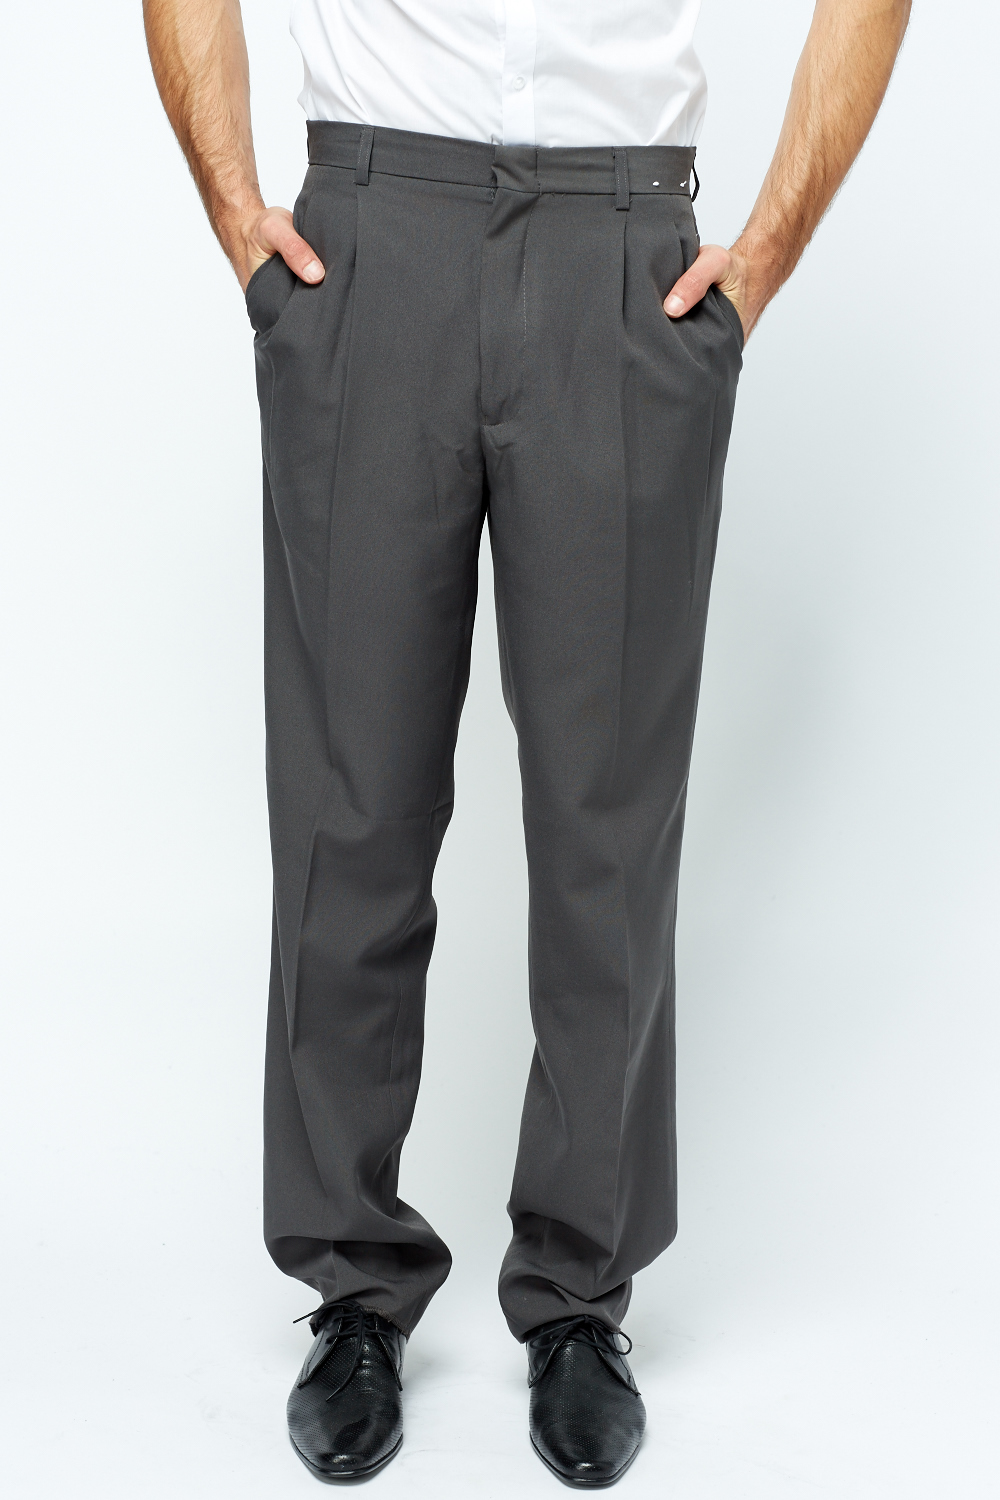 Mens Formal Tailored Trousers - Just $7